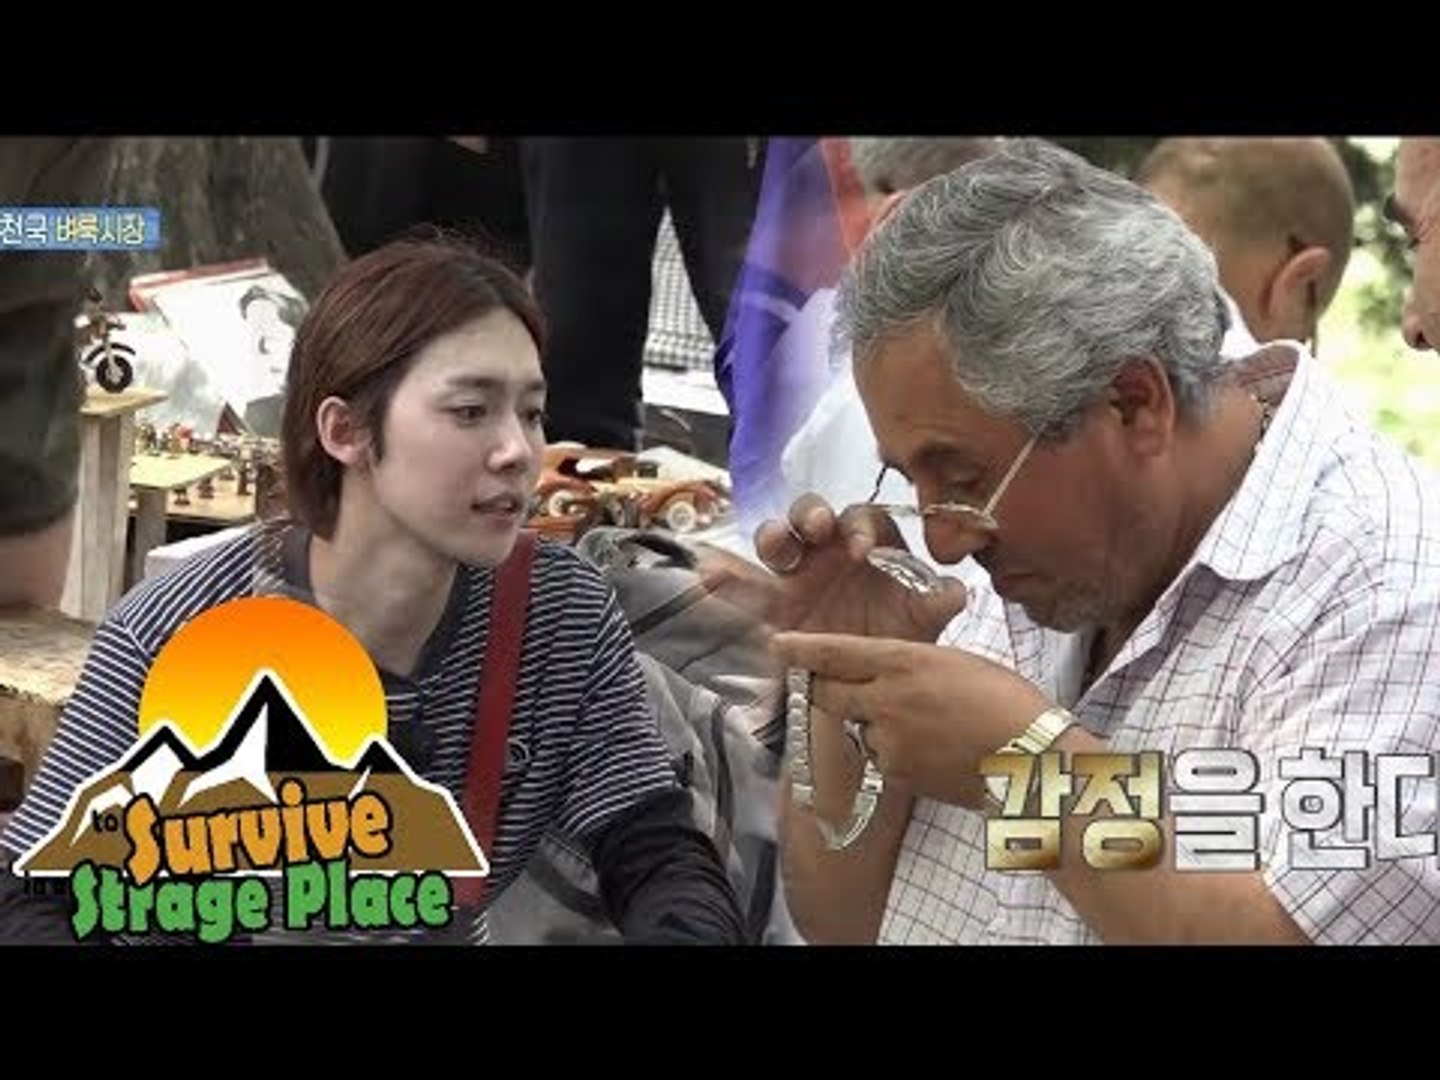 ['JINWOO' To Survive In Georgia] They Try To Sell A Watch At Flea Market 20170827